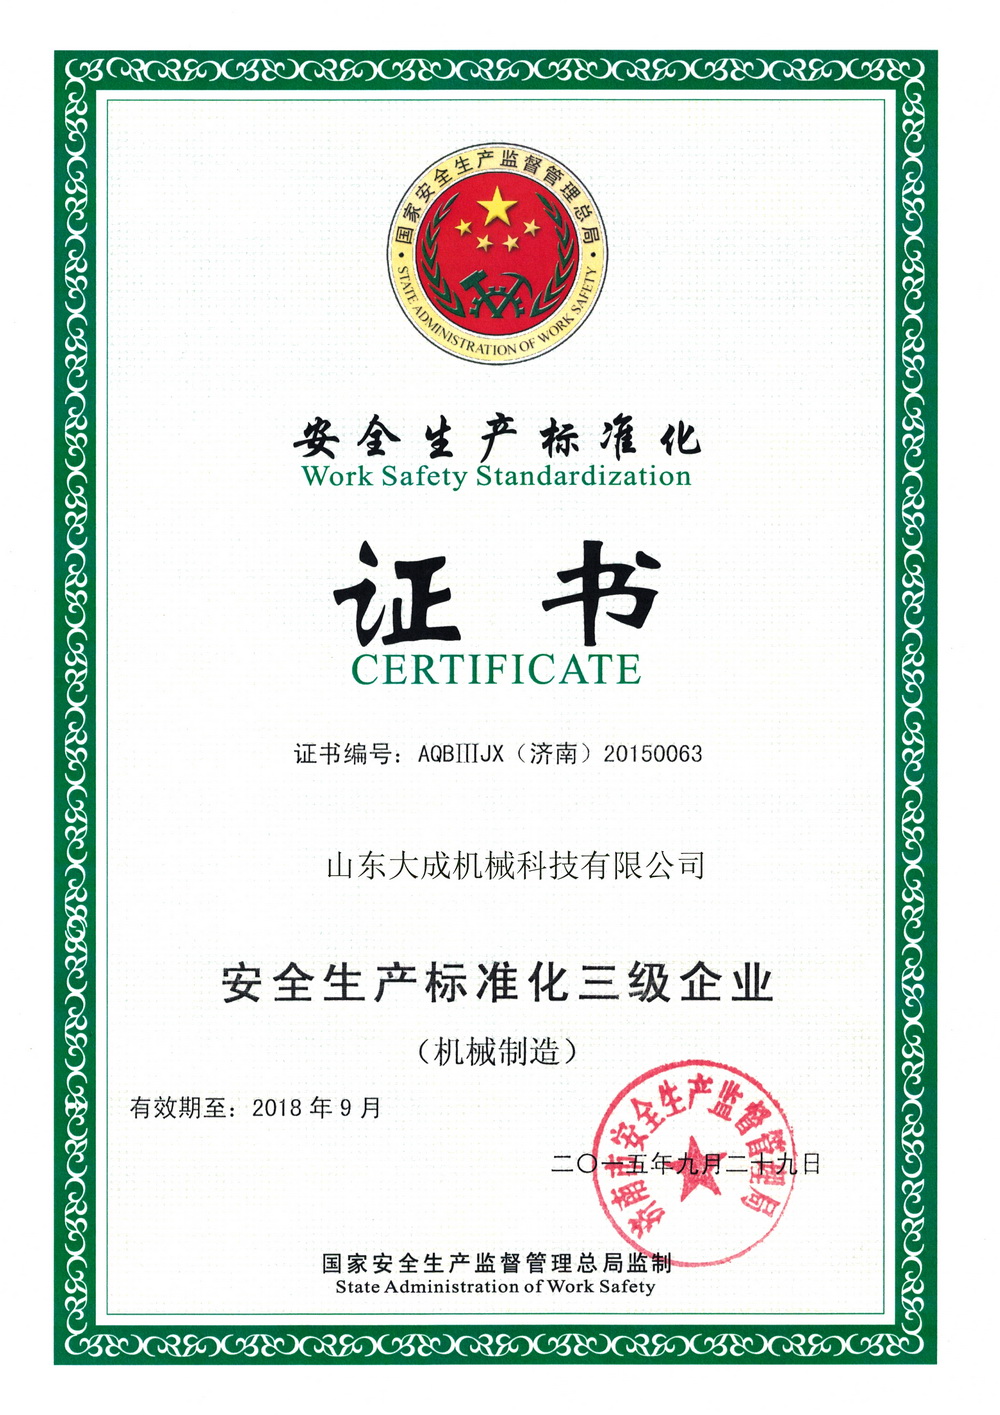 The company passed the roots blower safety standardization production company certification